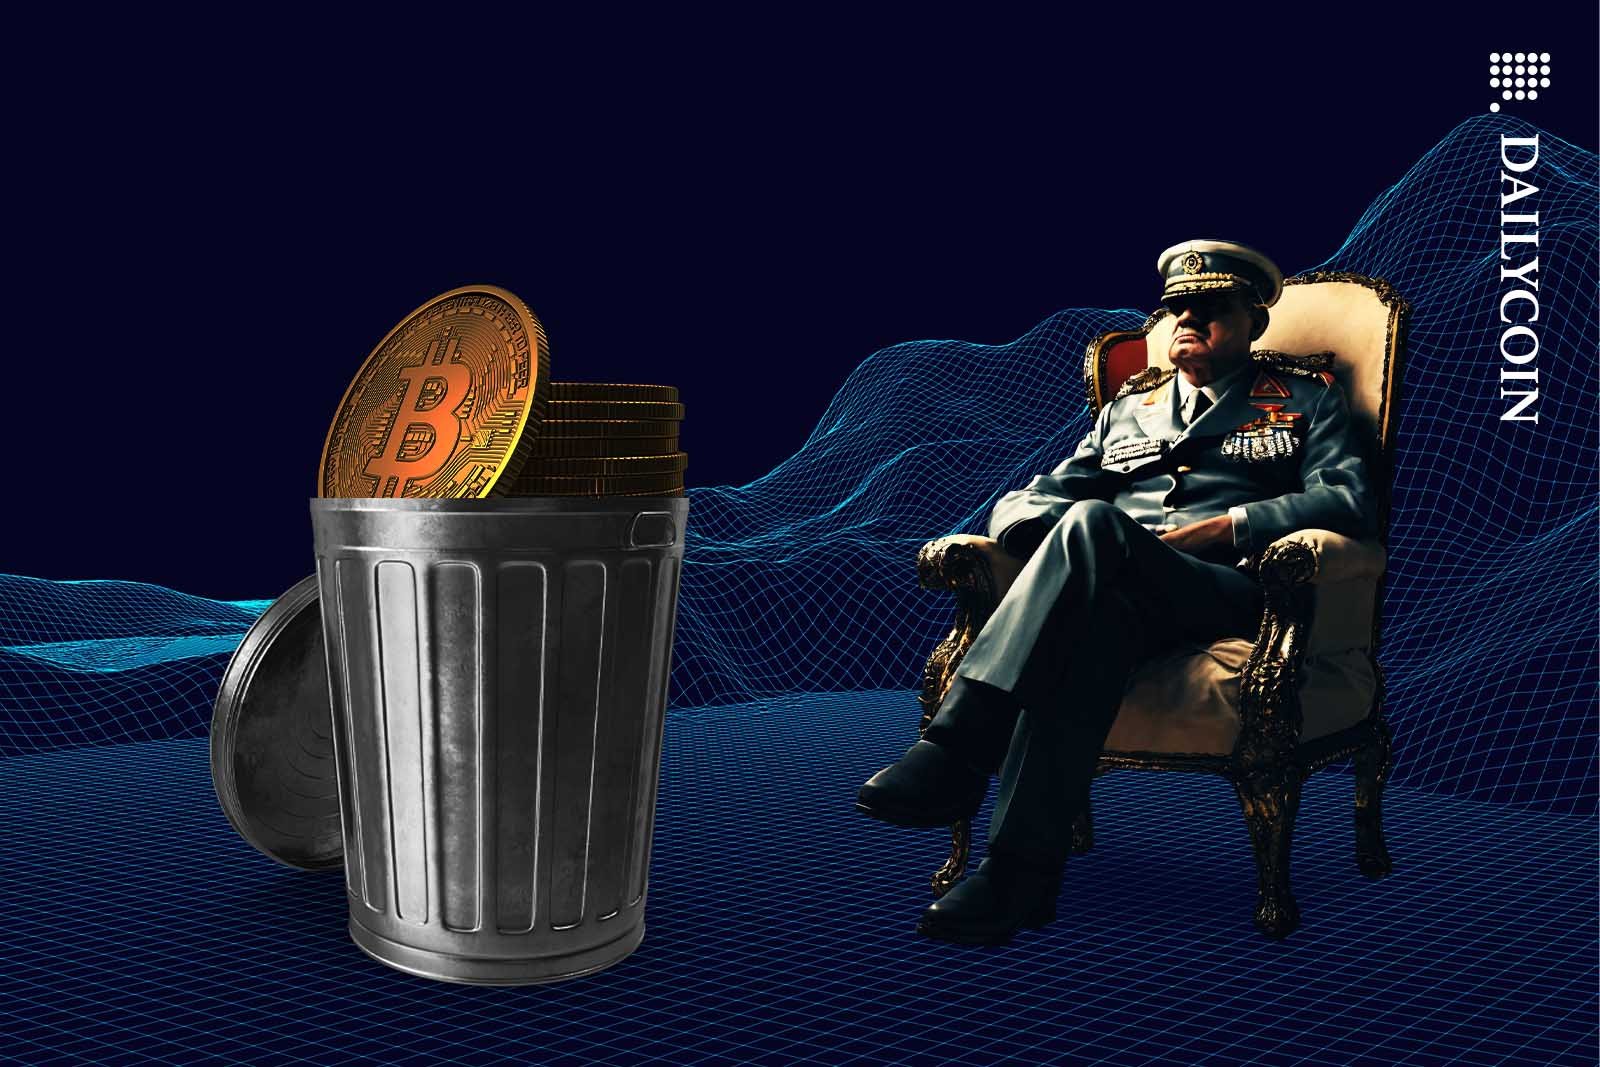 A dictator sitting in a fancy chair looking at some Bitcoins in a bin.